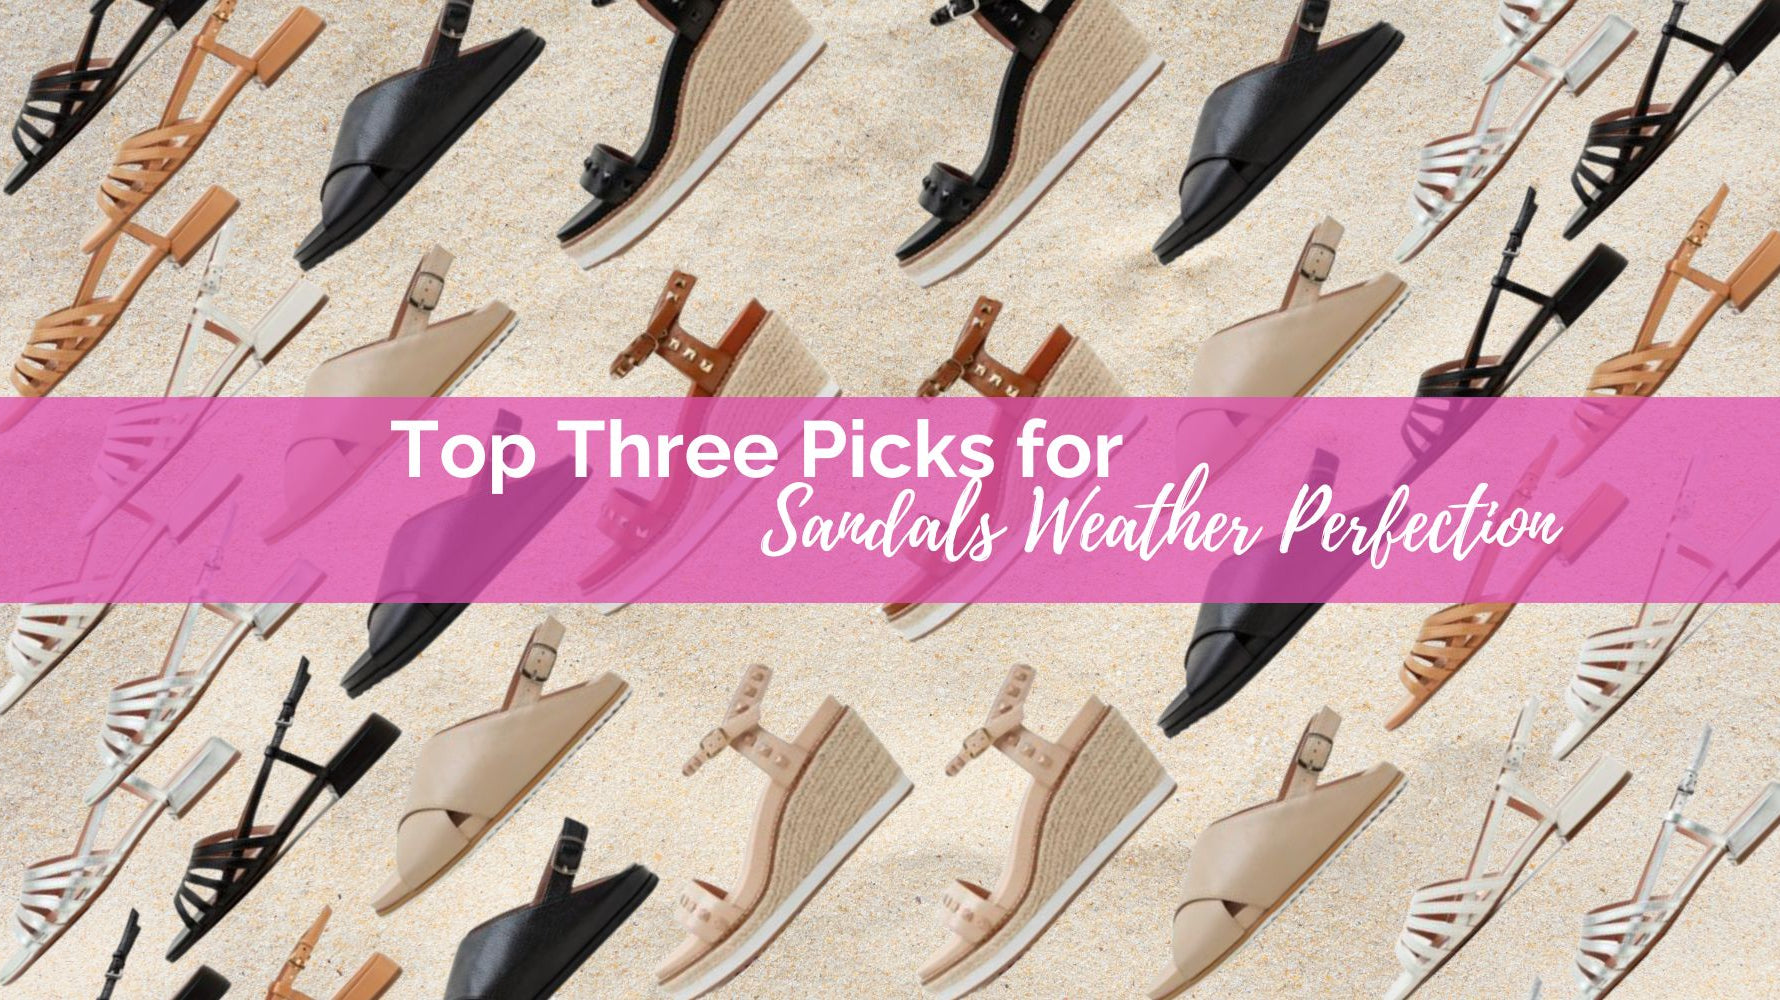 Top Three Picks for Sandals Weather Perfection